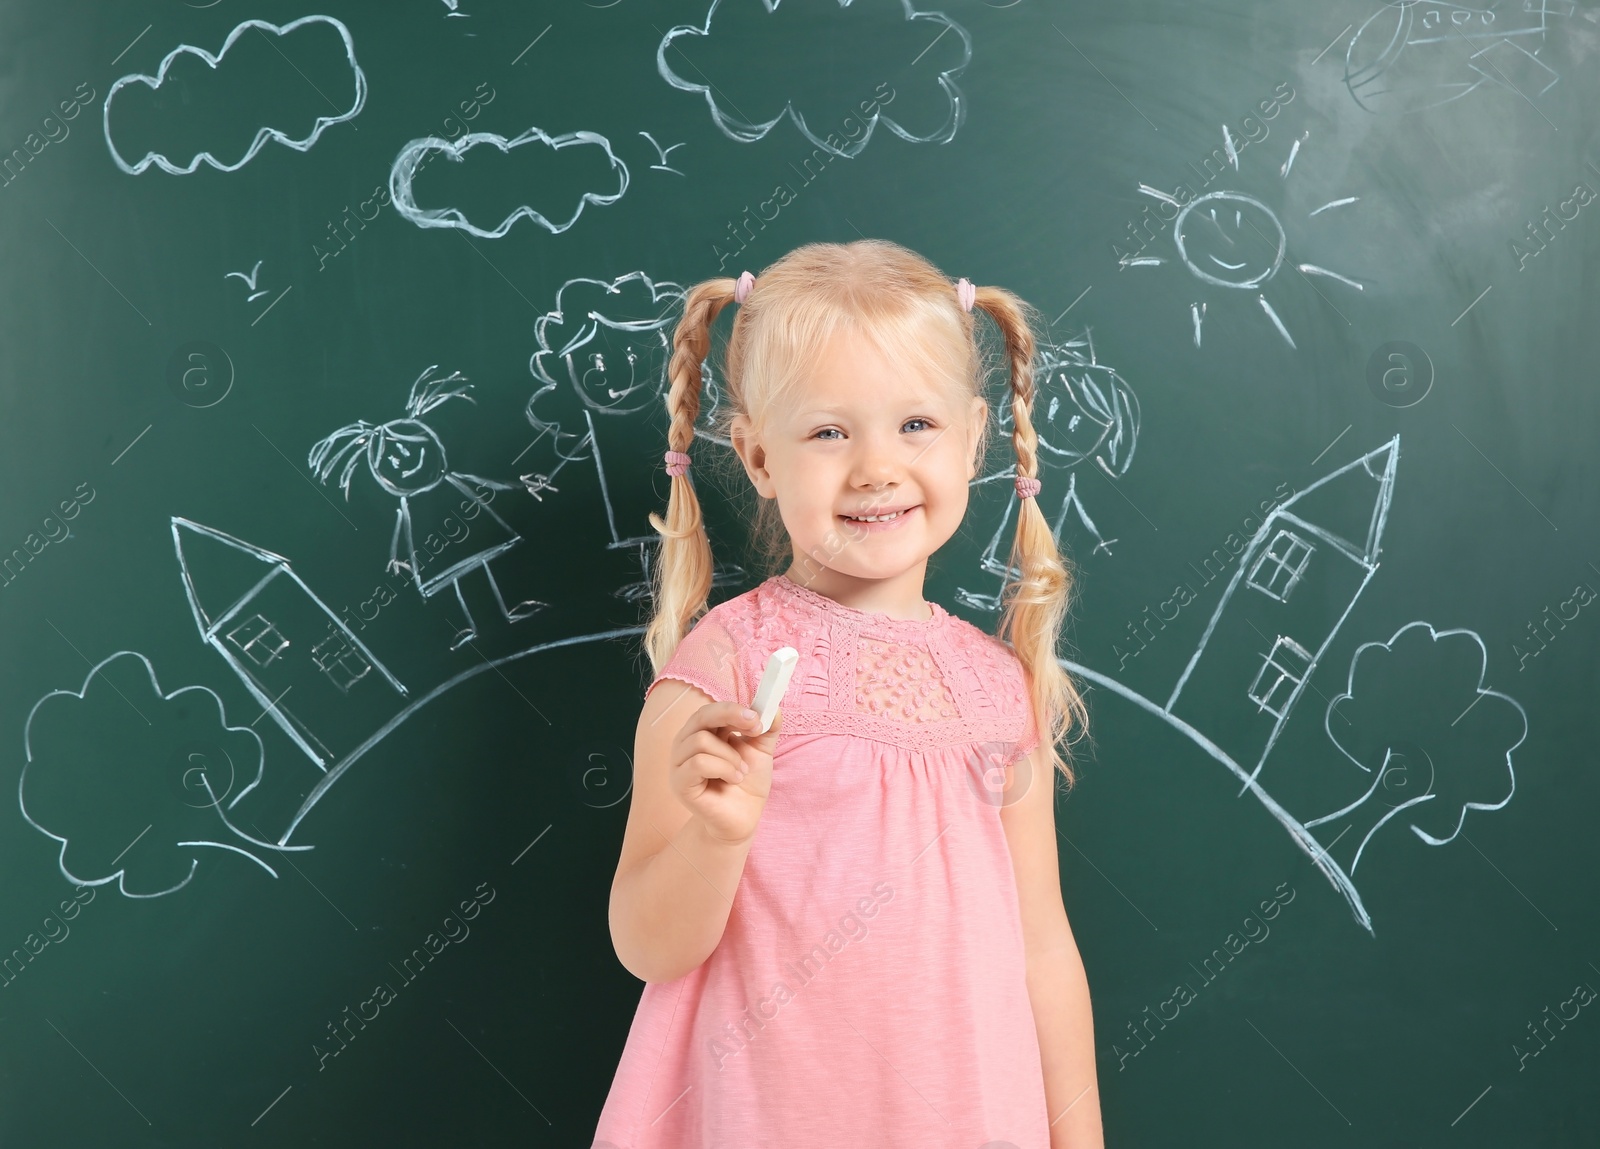 Photo of Little child holding chalk near blackboard with drawing of family